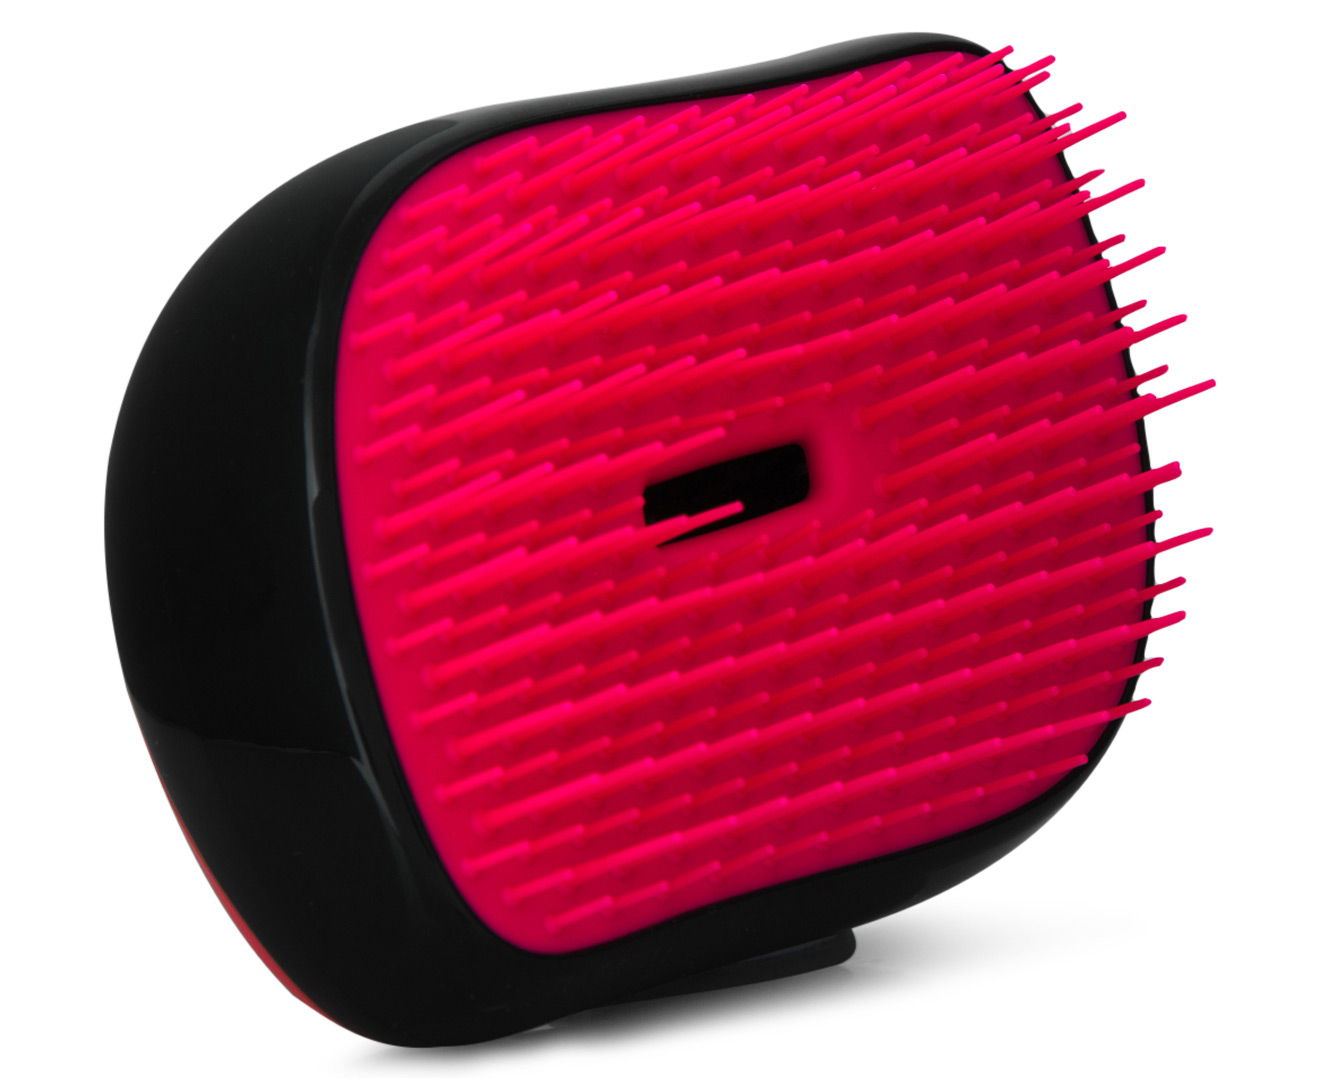 Tangle Teezer Compact Styler Detangling Hairbrush Pink Sizzle Catch